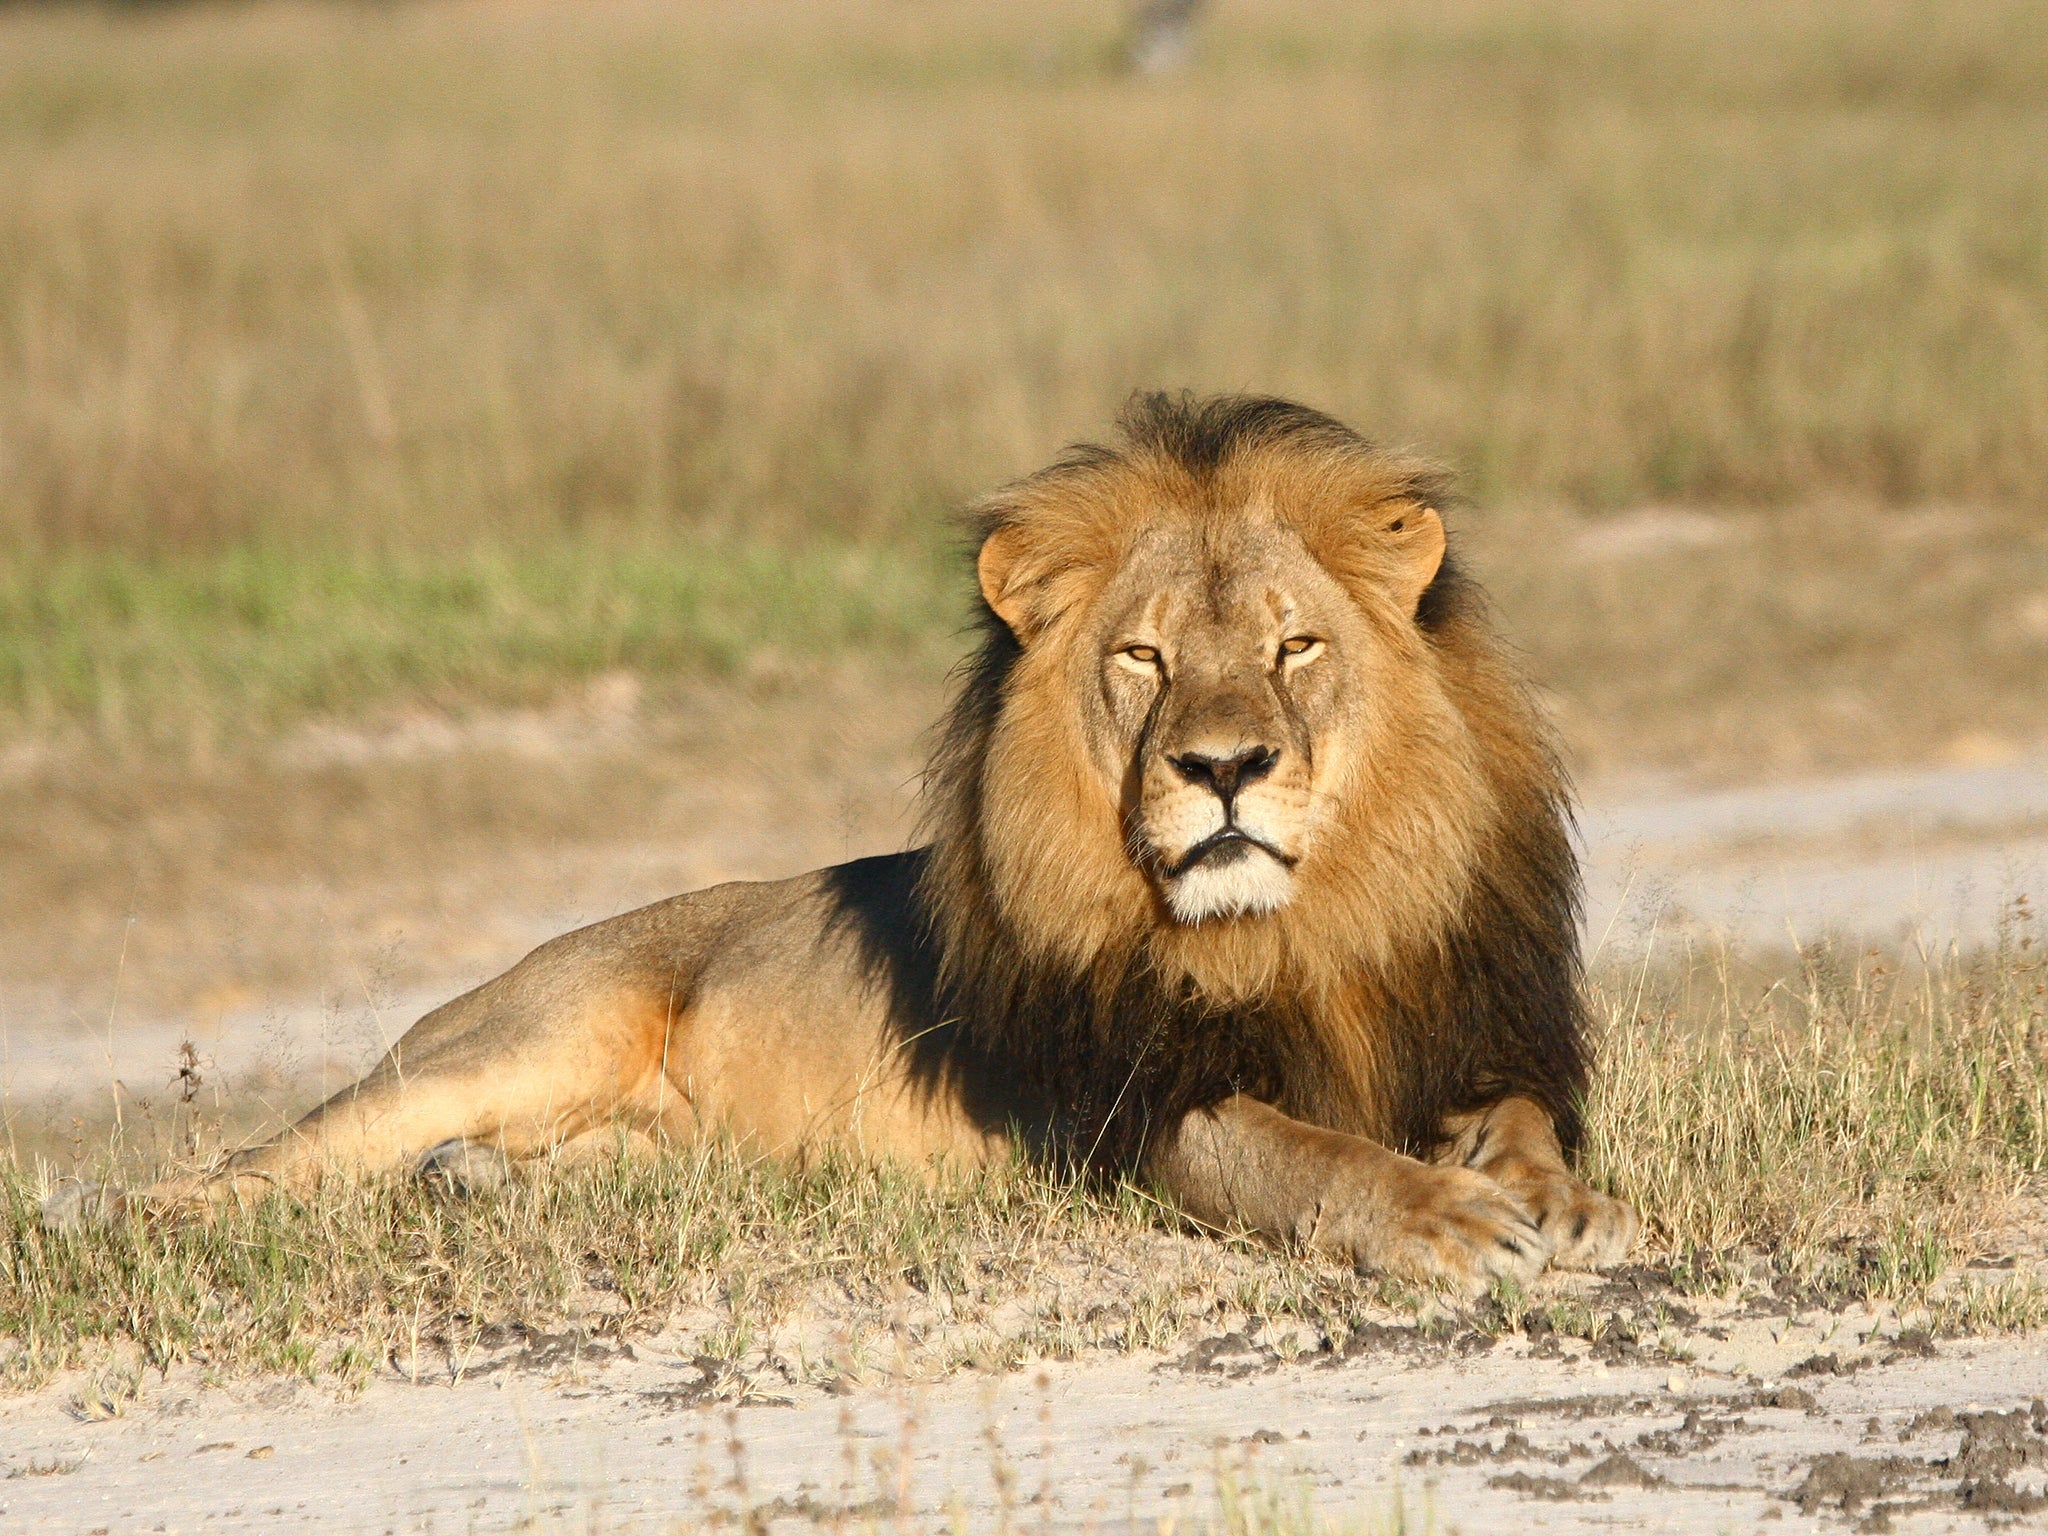 Cecil the lion was famous in Zimbabwe